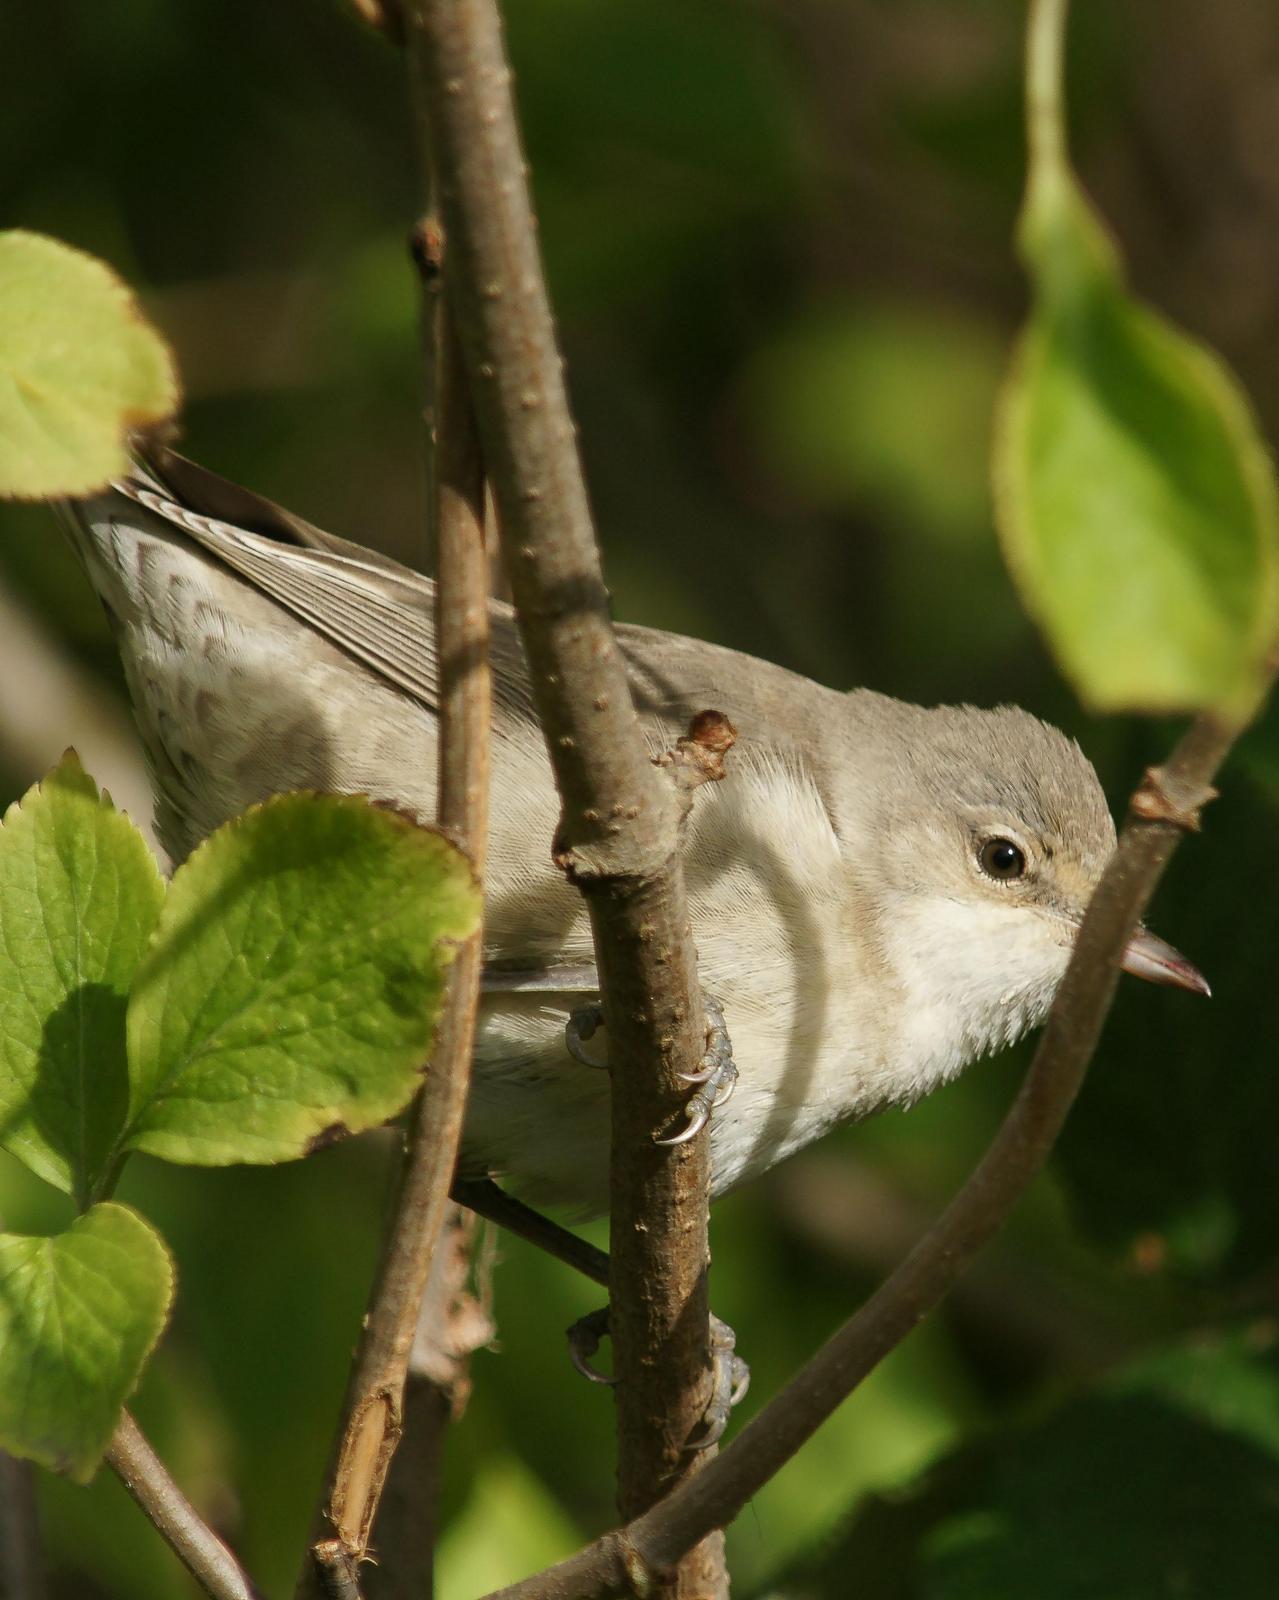 Barred Warbler Photo by Steve Percival